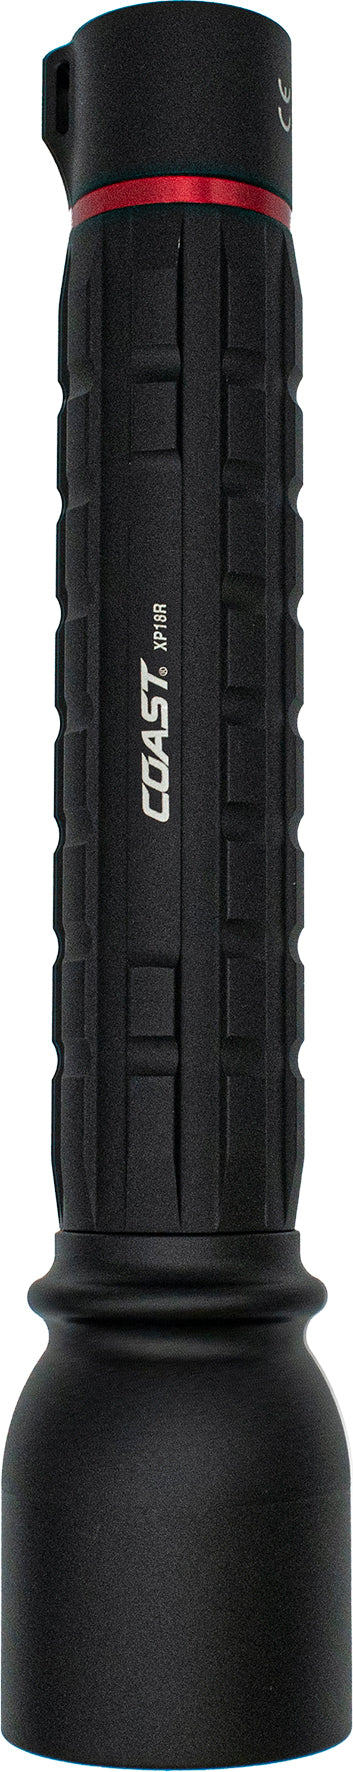 COAST Extreme Performace 3650 Lumen Rechargeable Torch